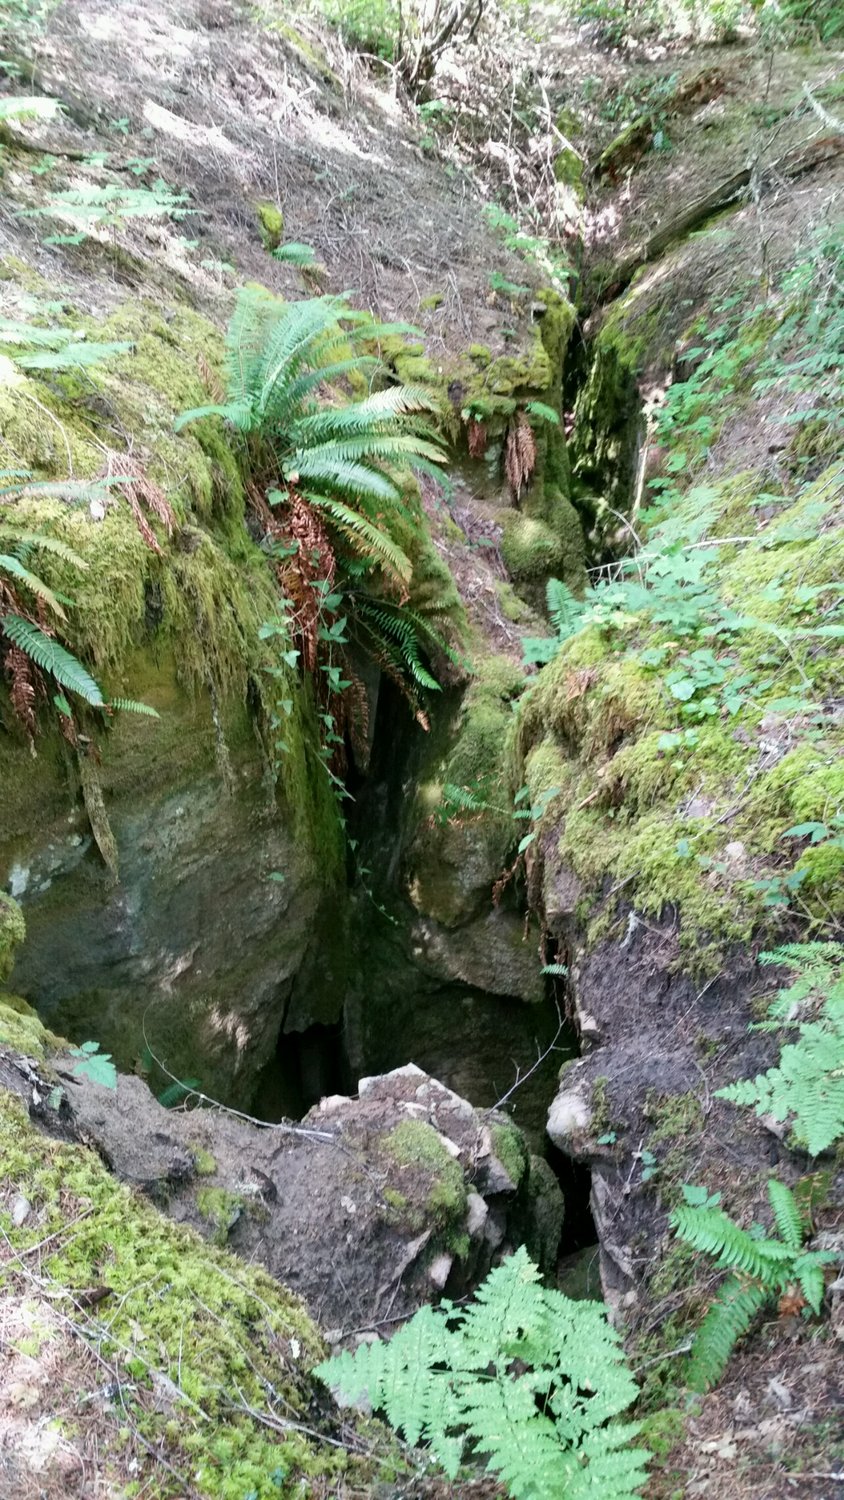 Part of the Wolff’s cave system is seen here.